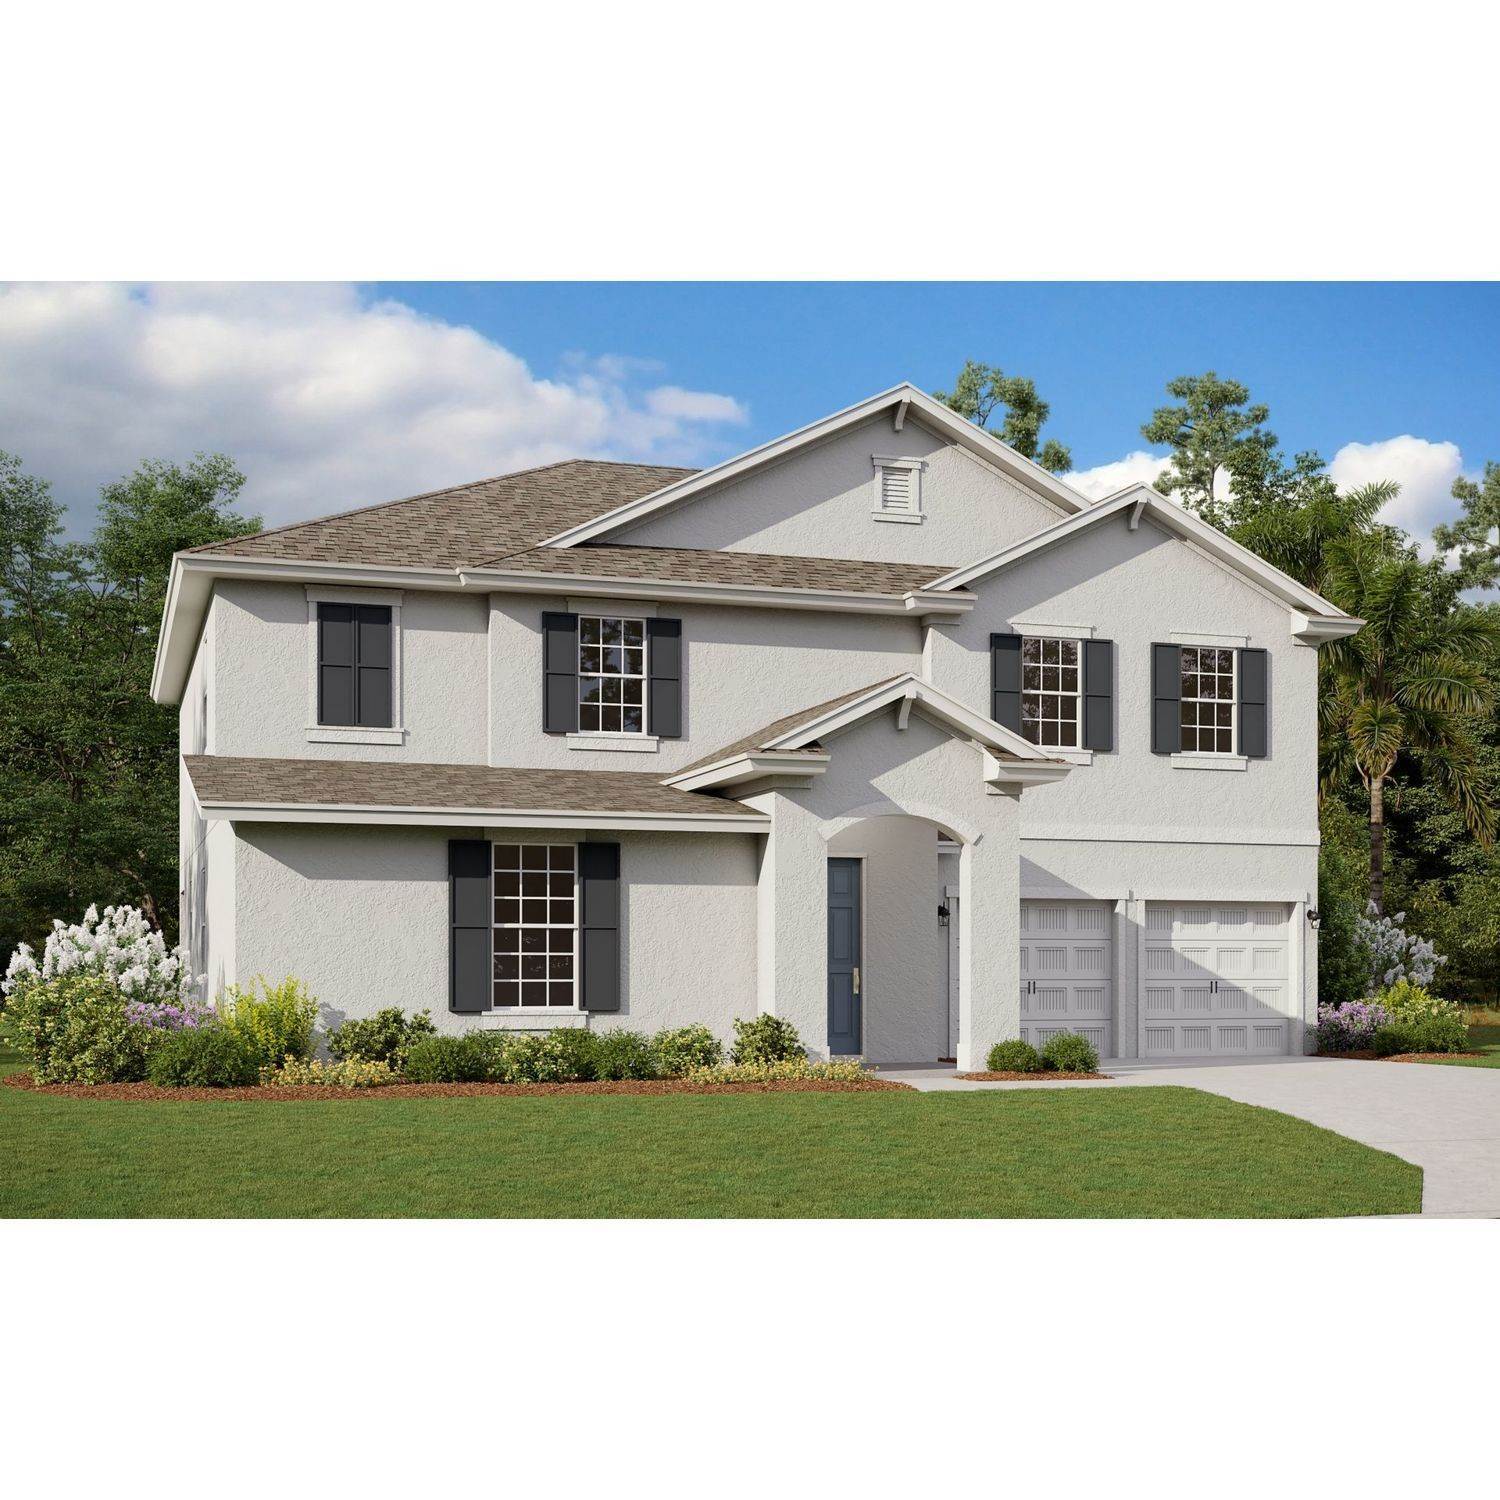 Single Family for Sale at Hills Of Minneola Sales Office Coming Soon, Minneola, FL 34715